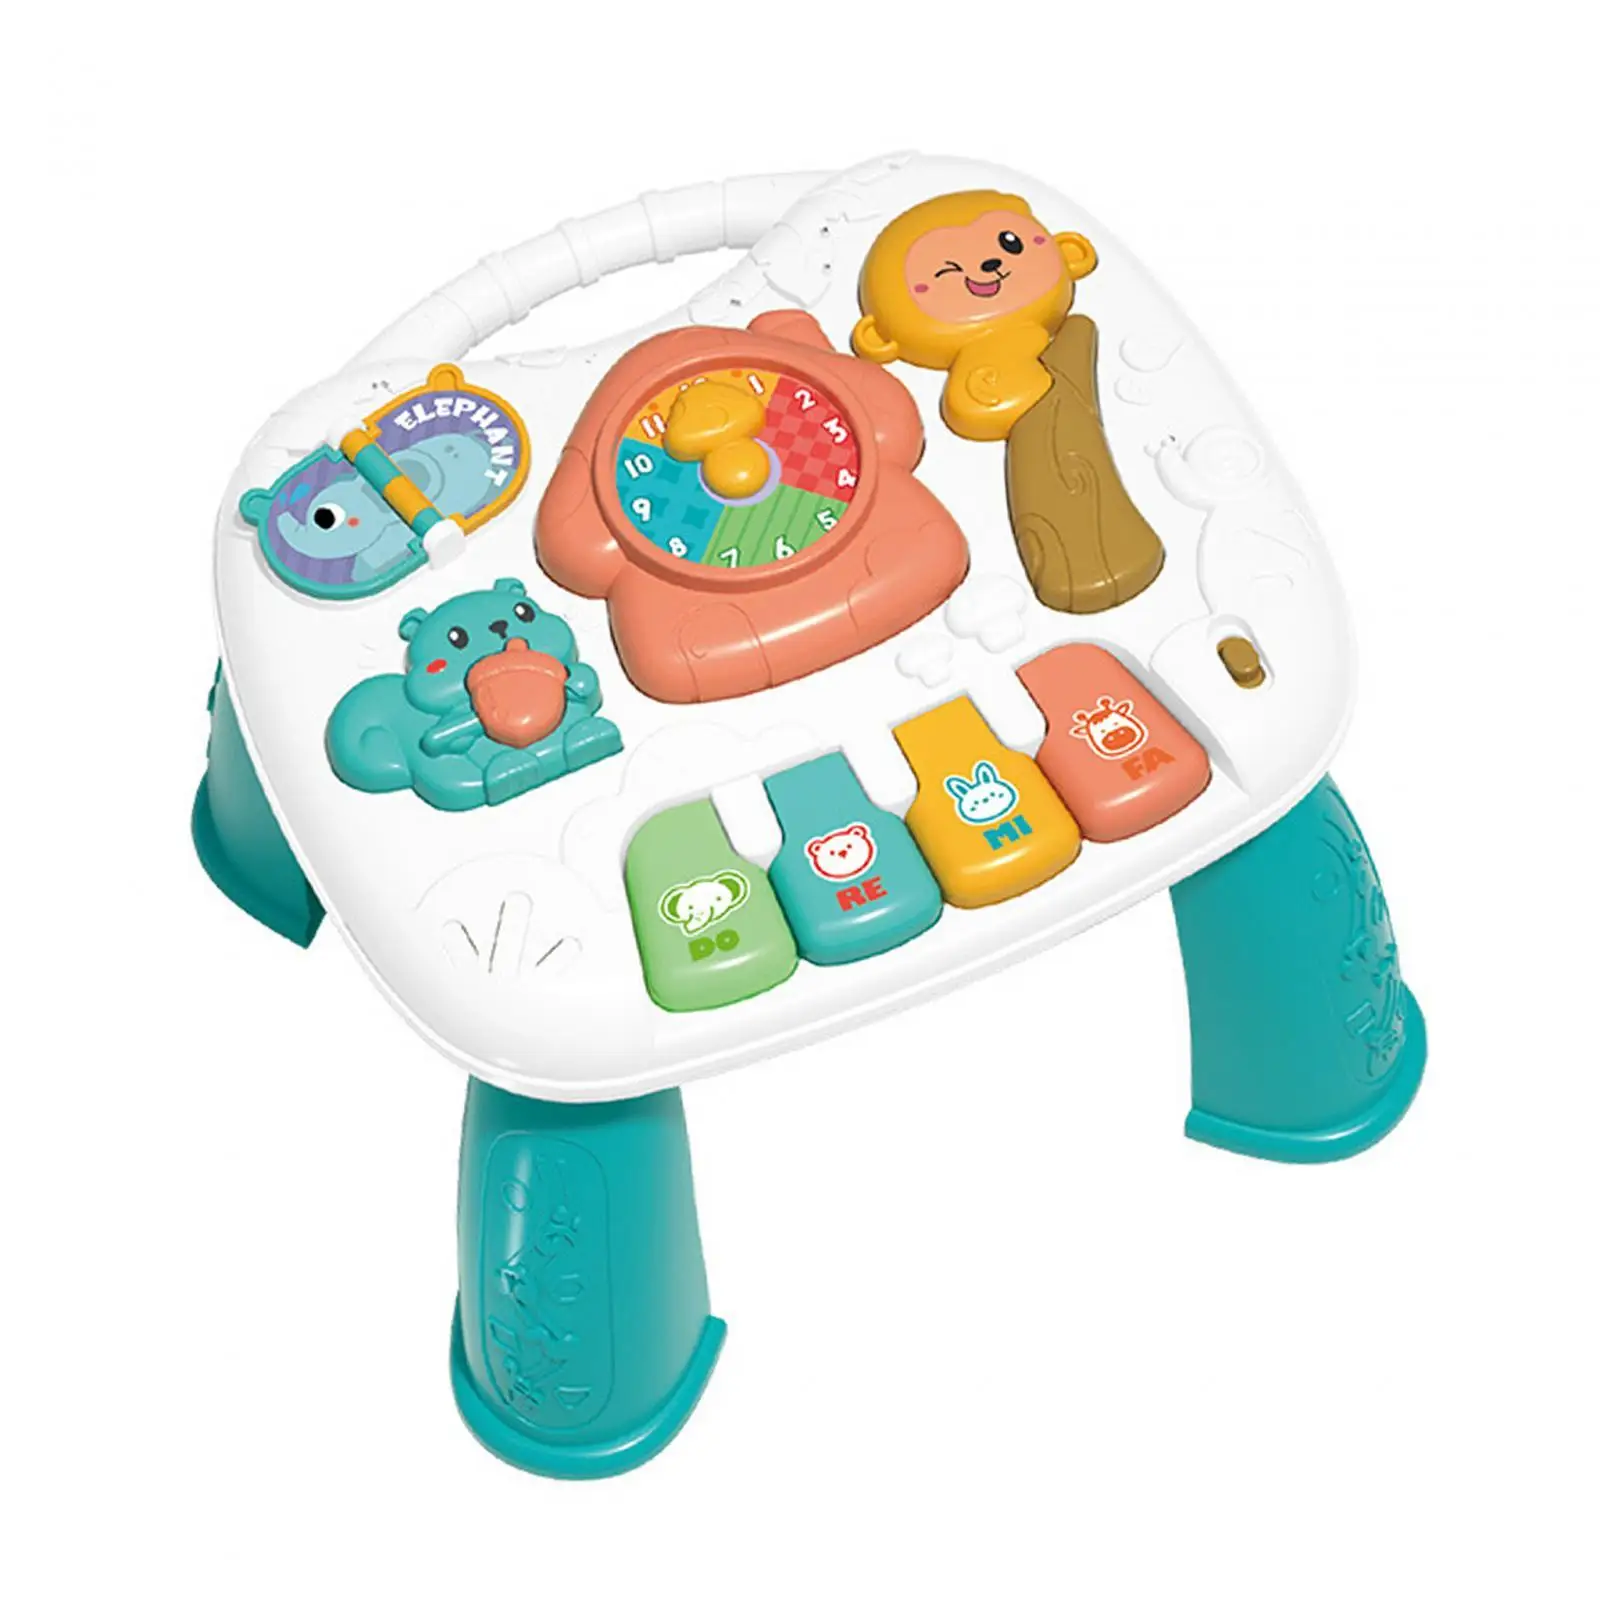 Musical Learning Table Toddlers Educational Learning Toys Kids Boys Girls Discovering Portable Music Activity Center Table